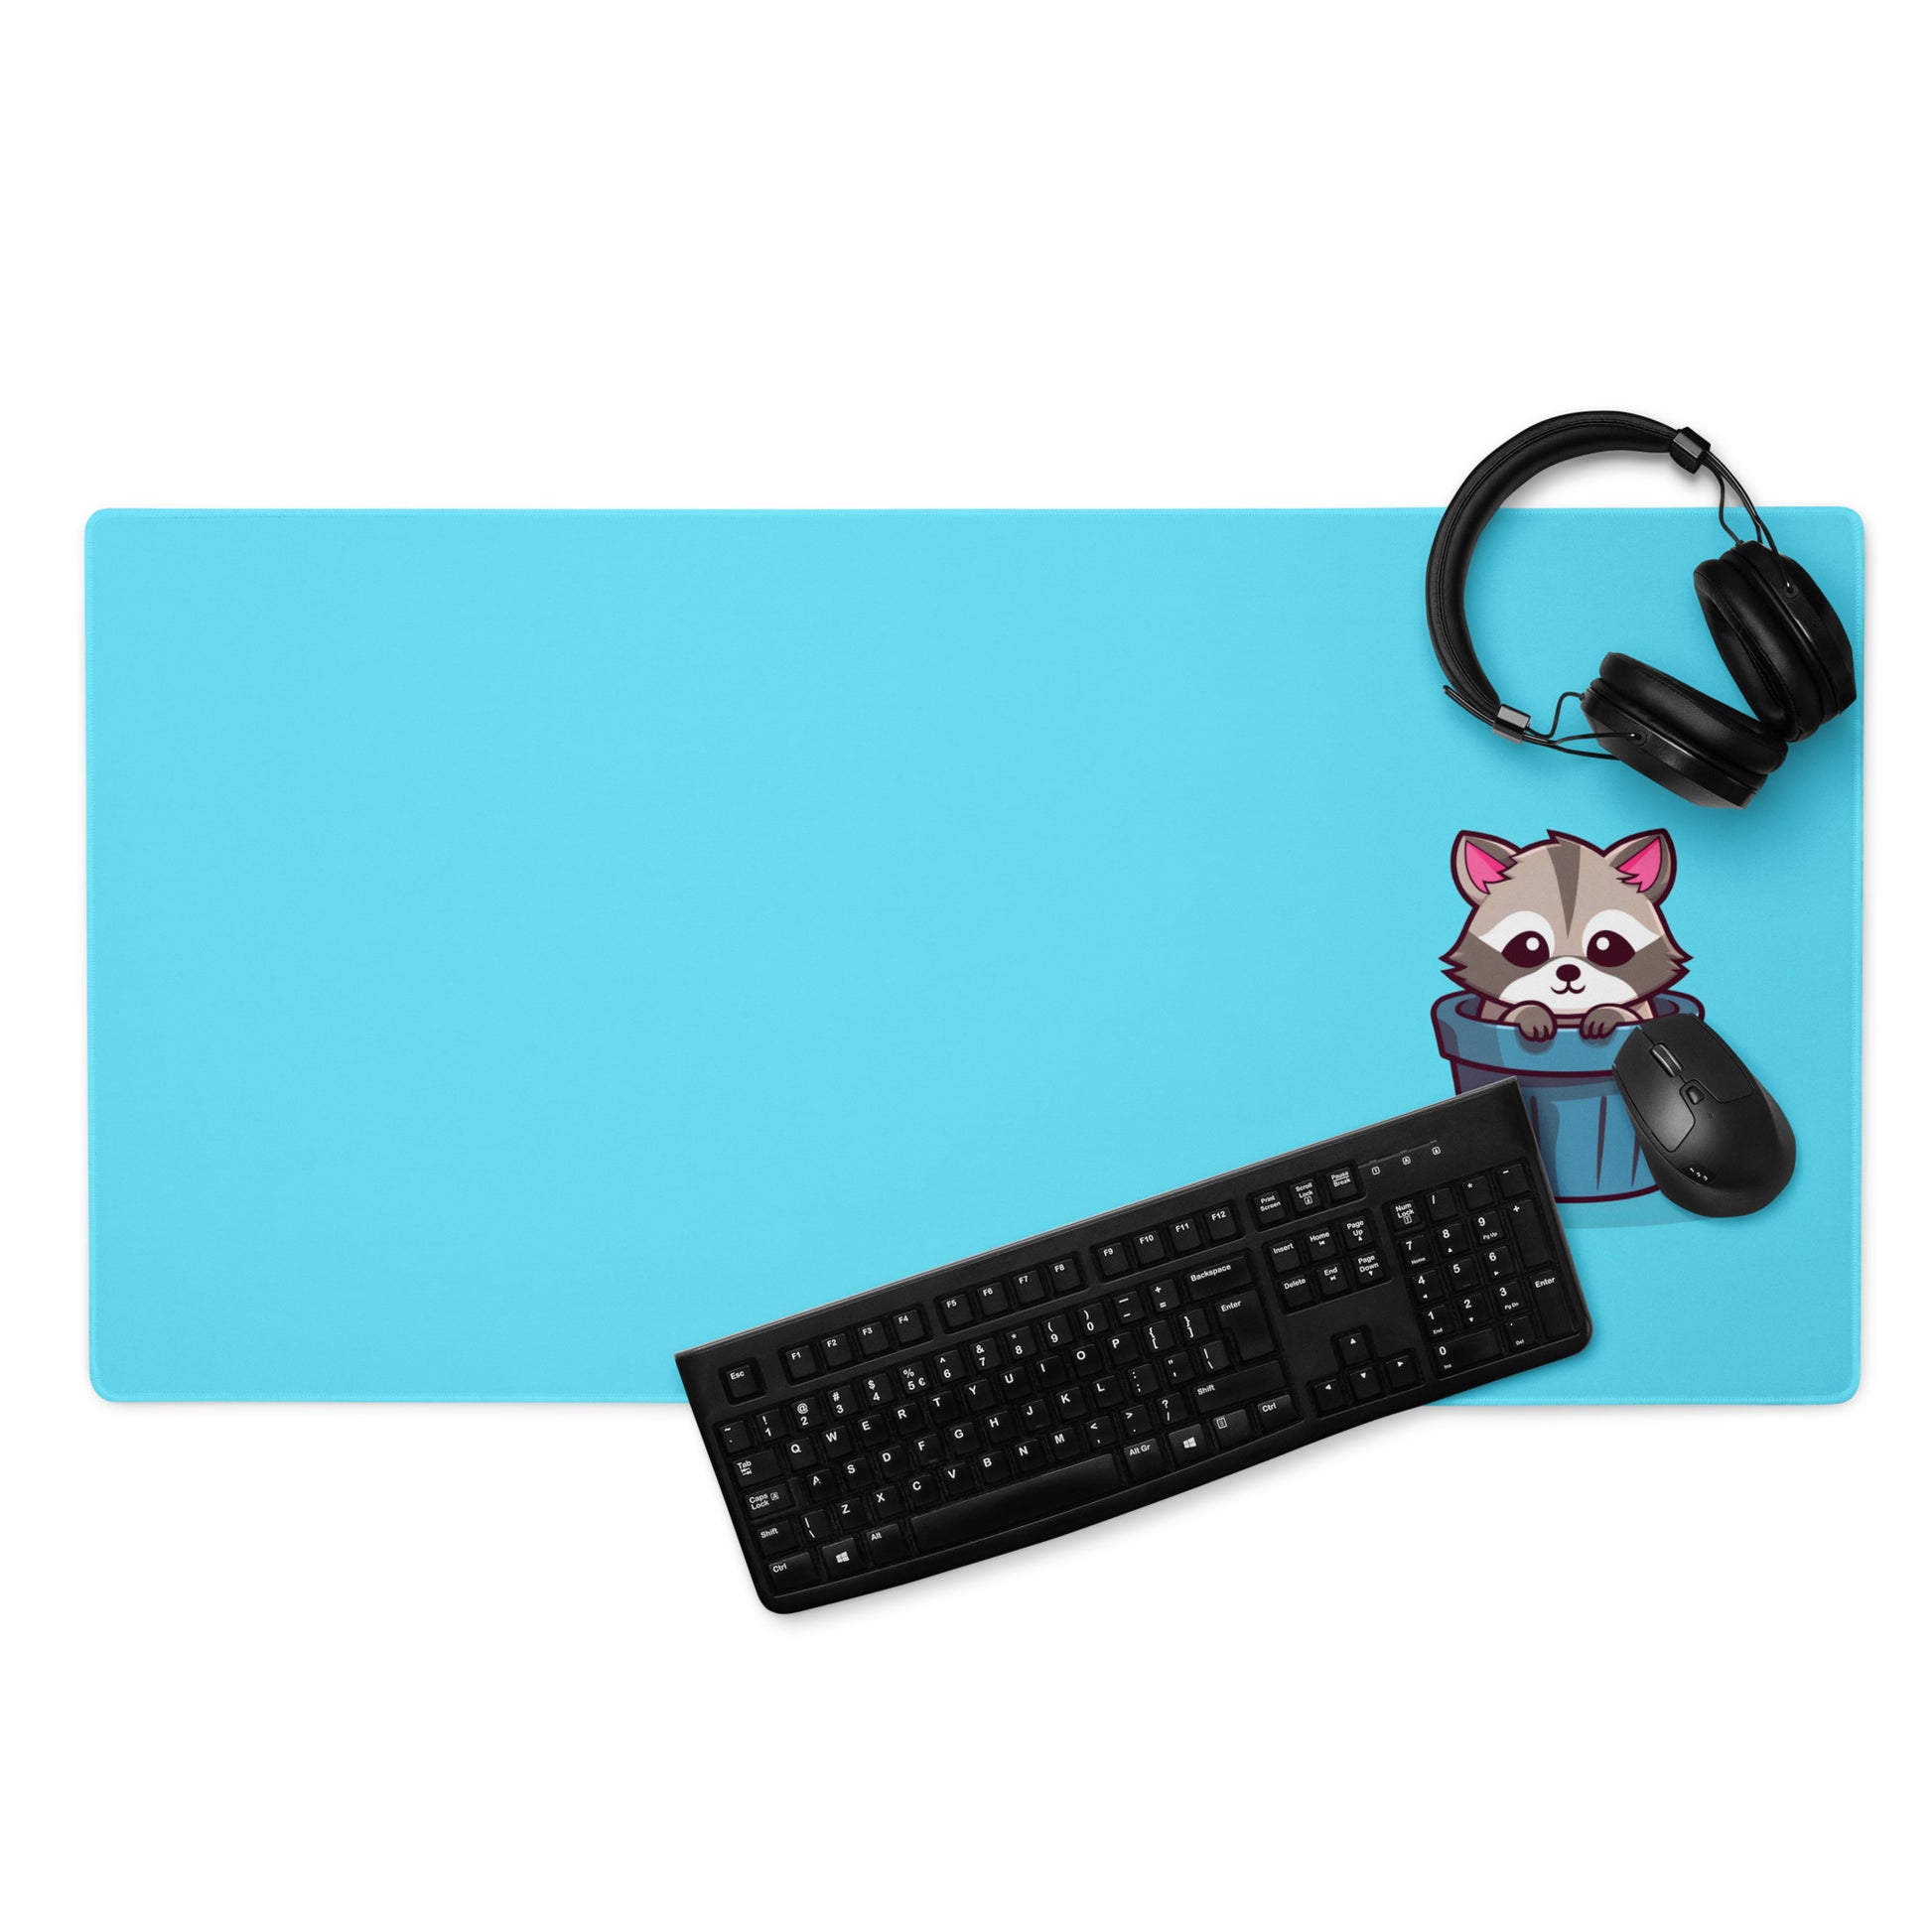 A gaming desk pad with a kawaii raccoon in a garbage can on a blue background. A keyboard, mouse, and headphones sit on it.